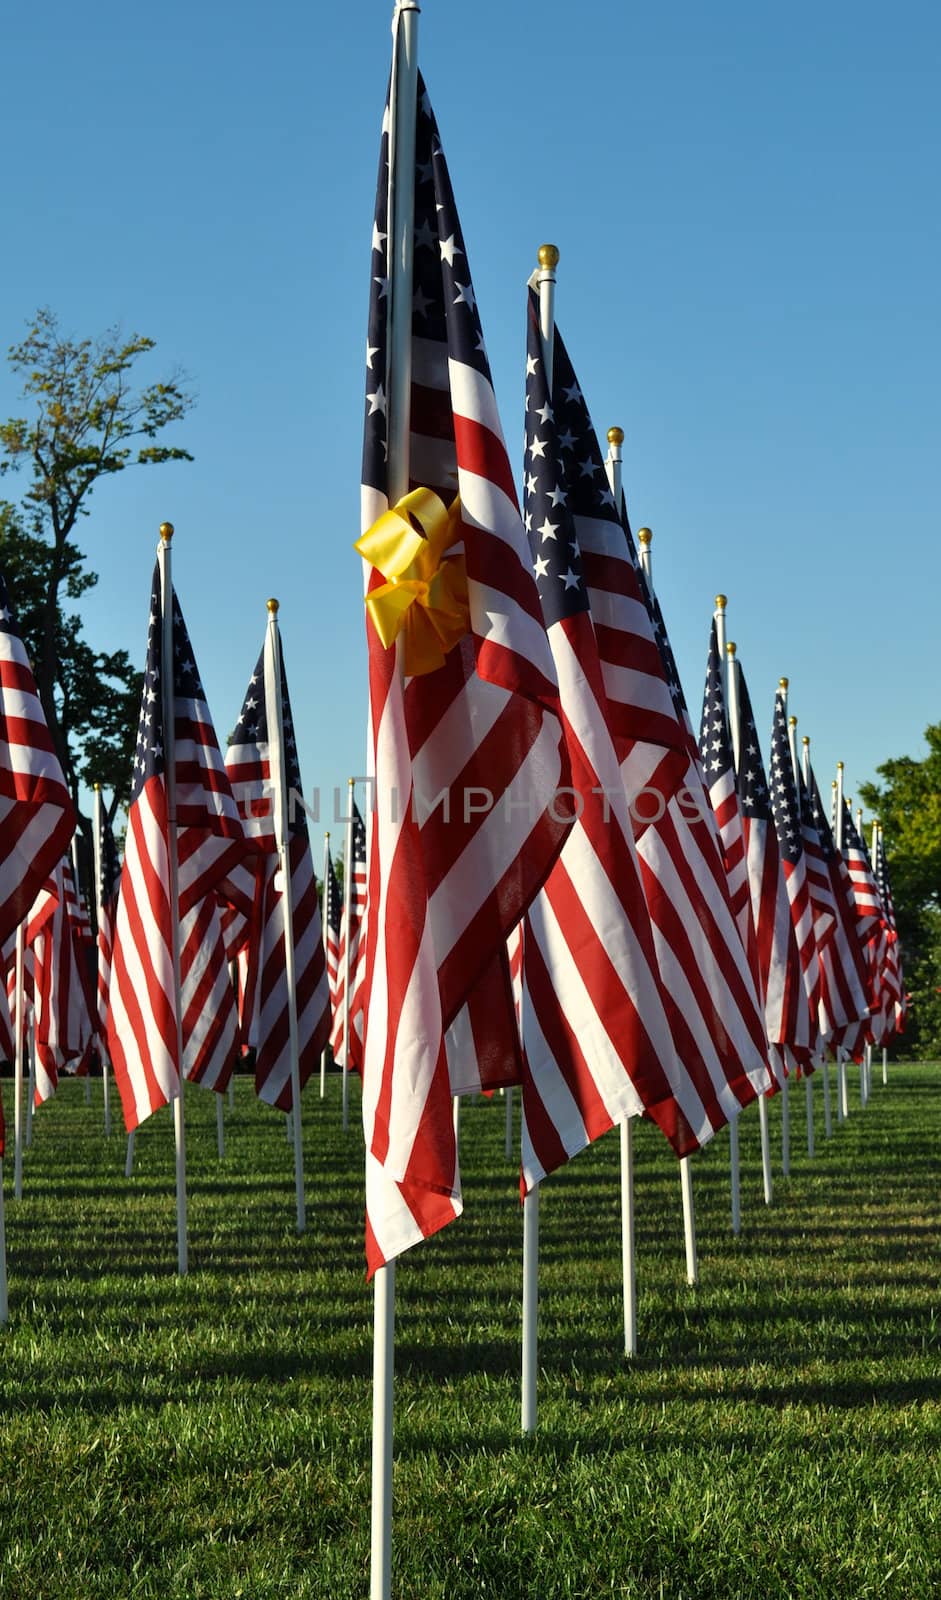 Flags by RefocusPhoto